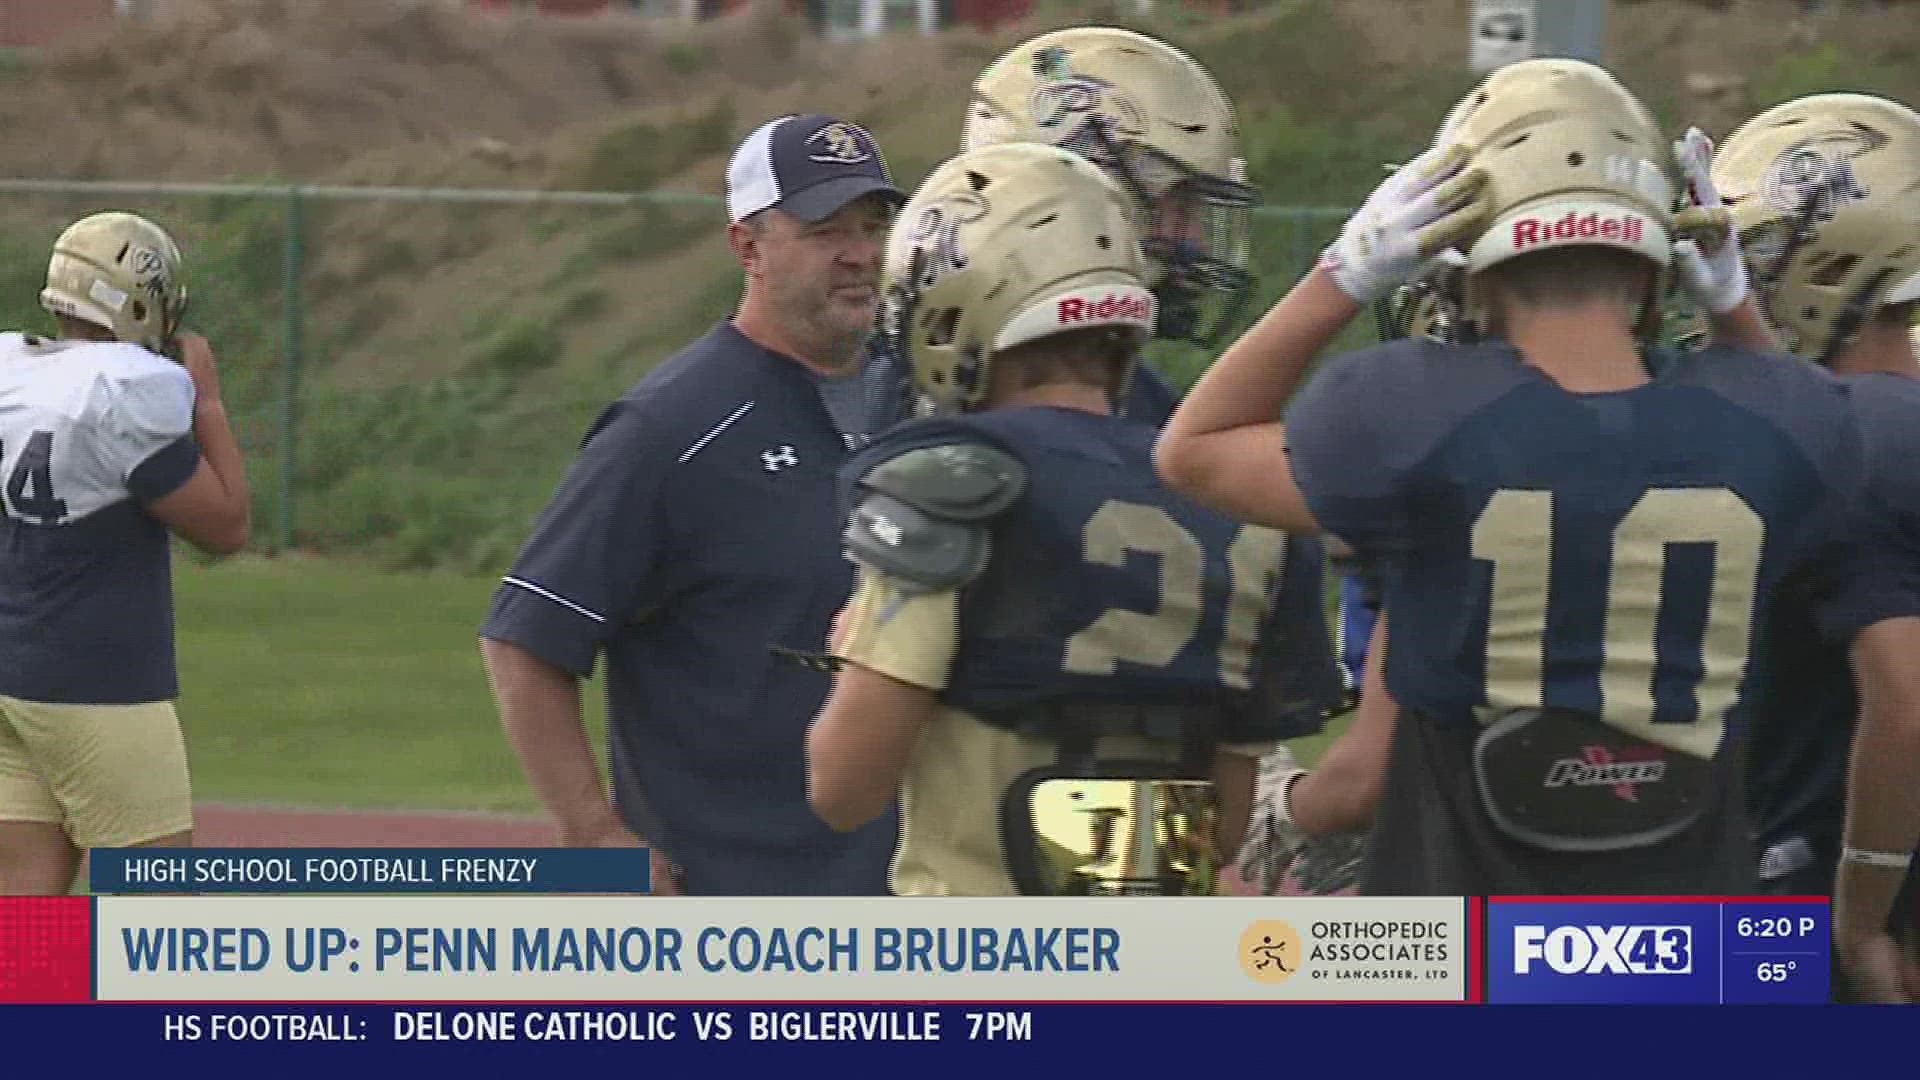 HSFF 'Wired Up' with Penn Manor coach Brubaker